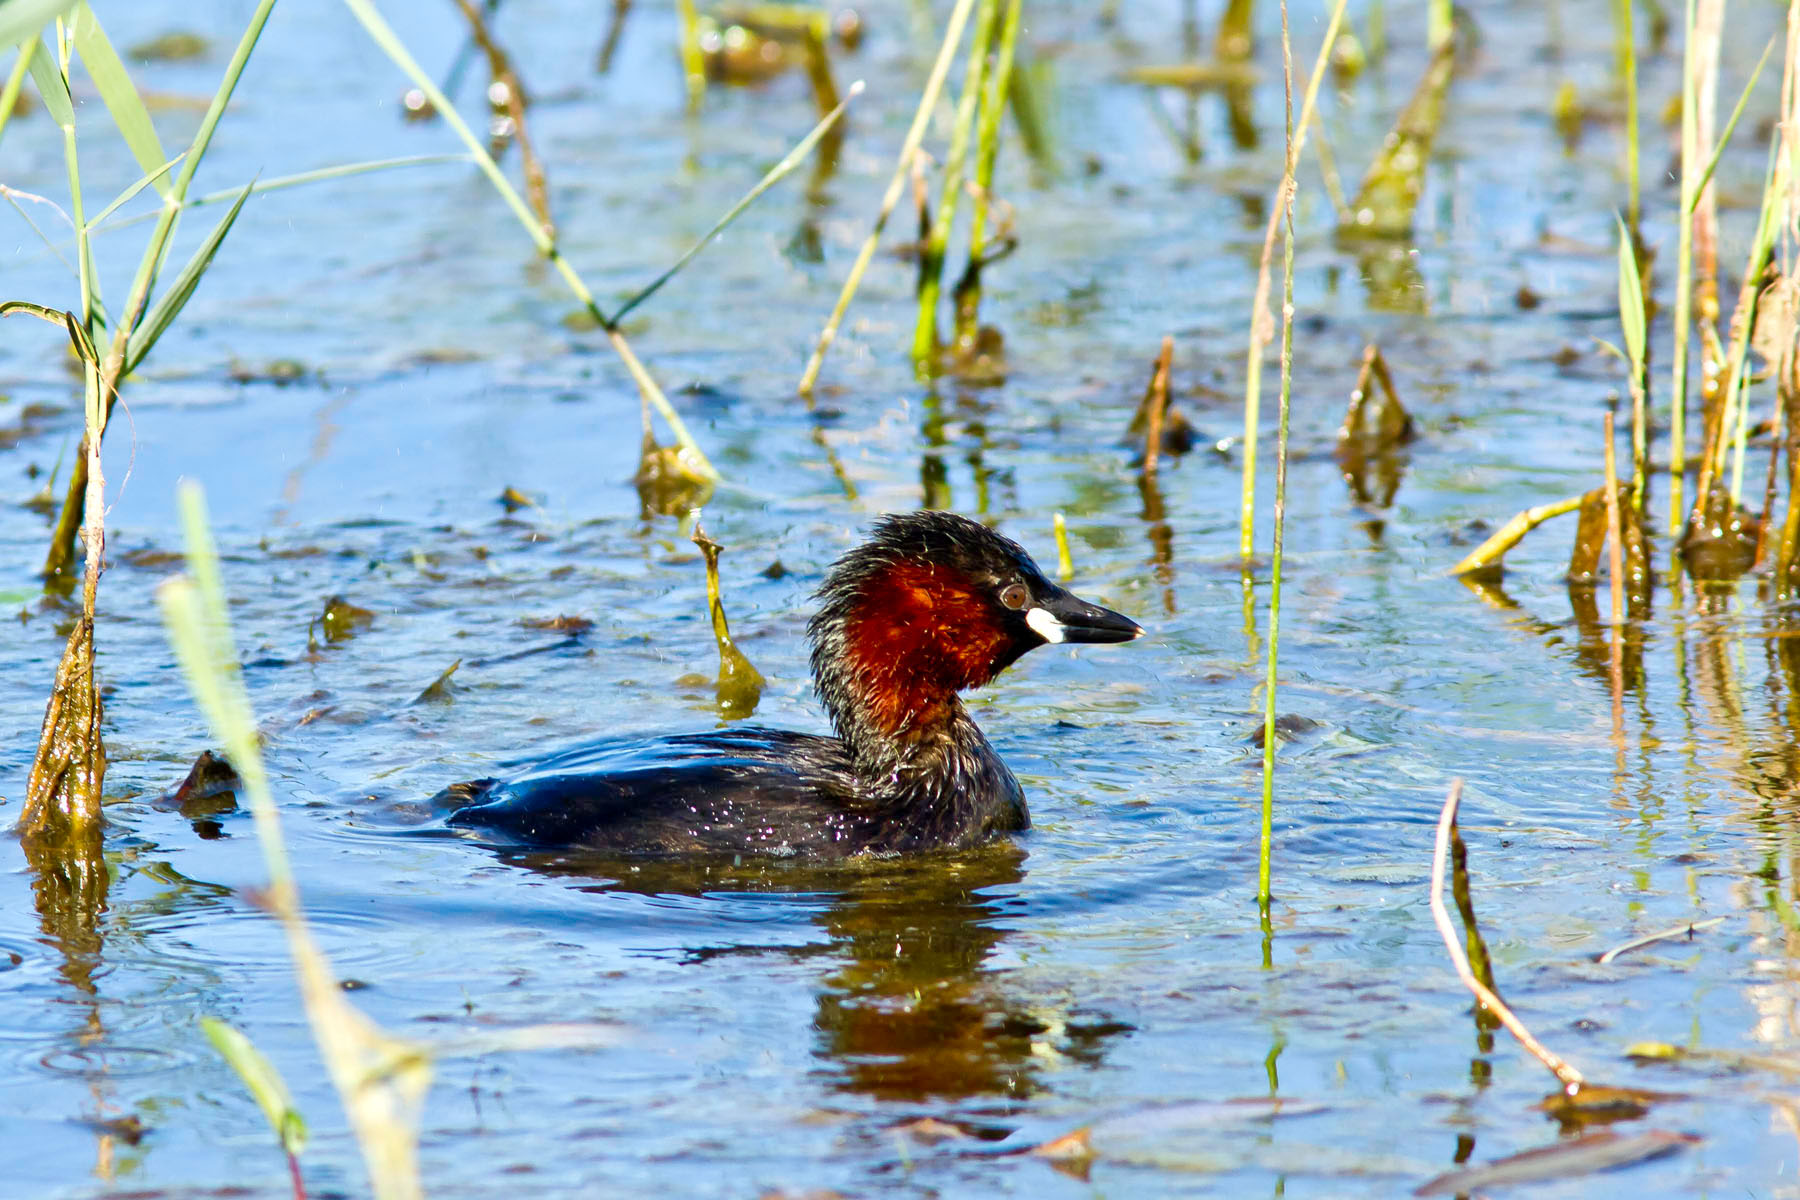 /Guewen/galeries/public/Nature/France/Grebes_Brenne/Grebes_013.jpg